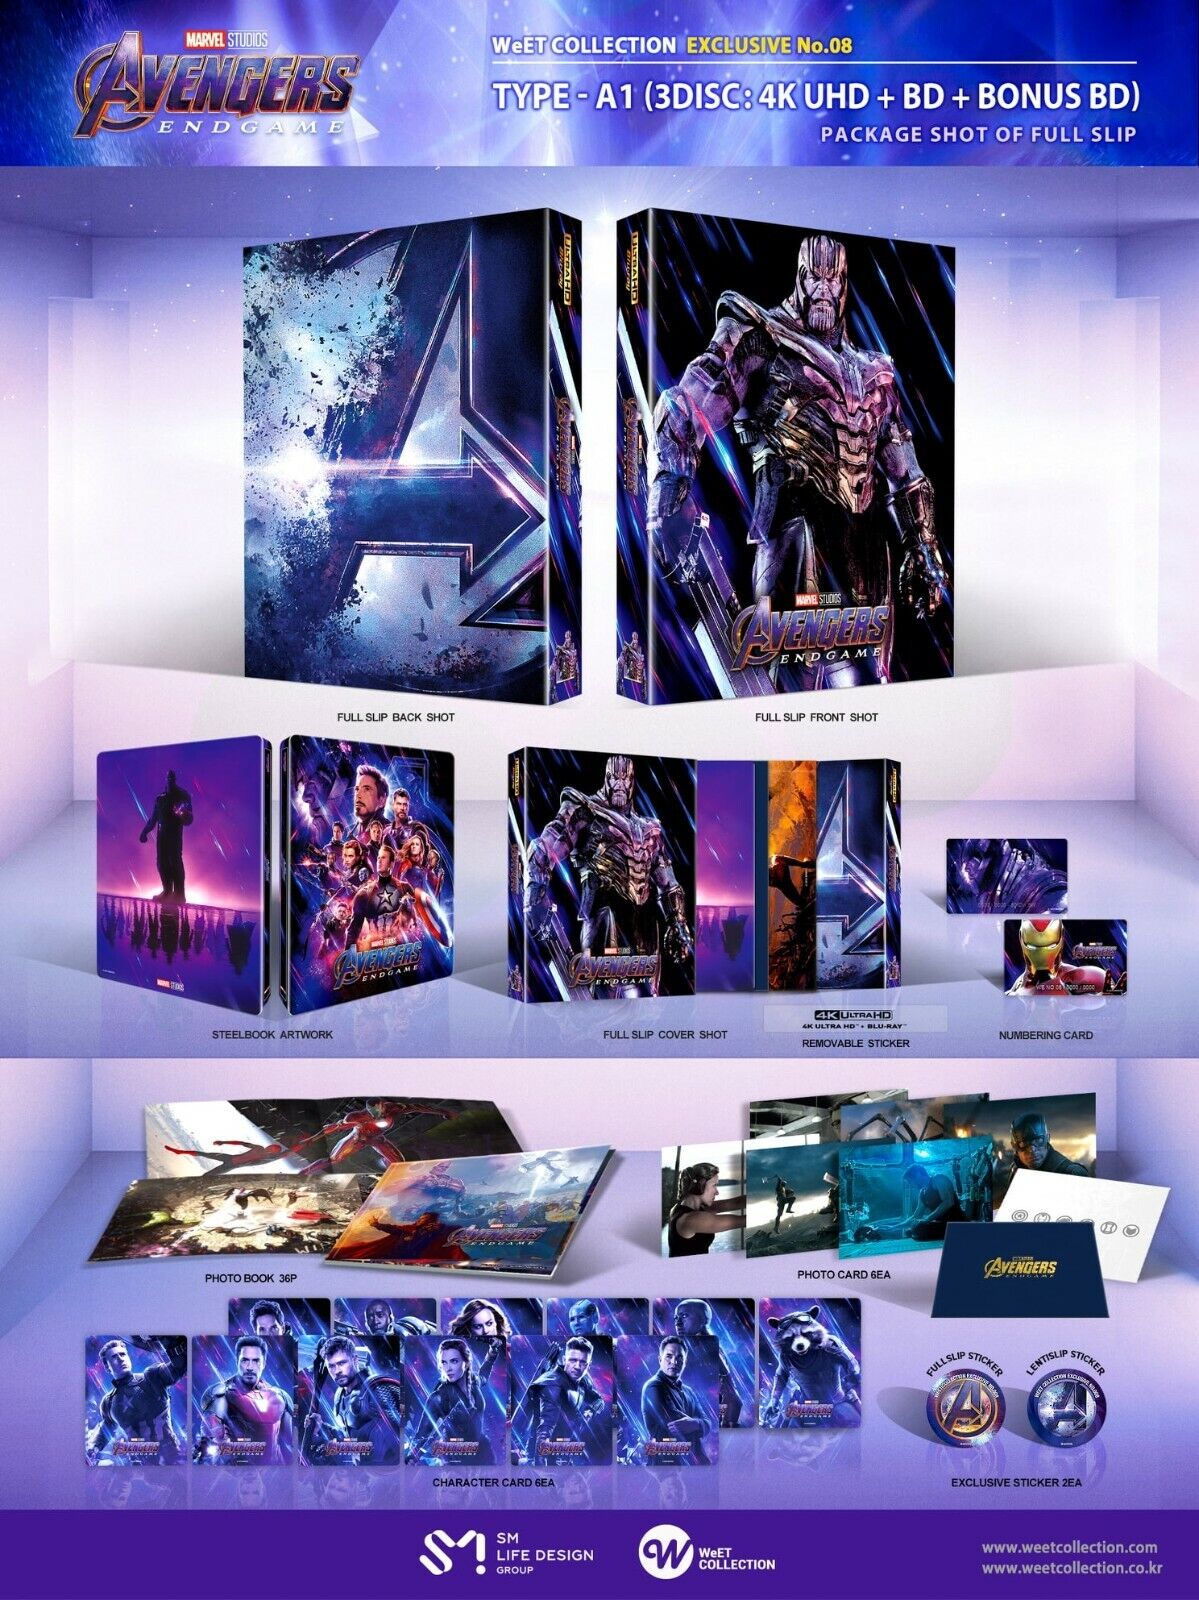 Avengers: Endgame 4K+2D Blu-ray Steelbook WeET Collection Exclusive #8 Full Slip A1